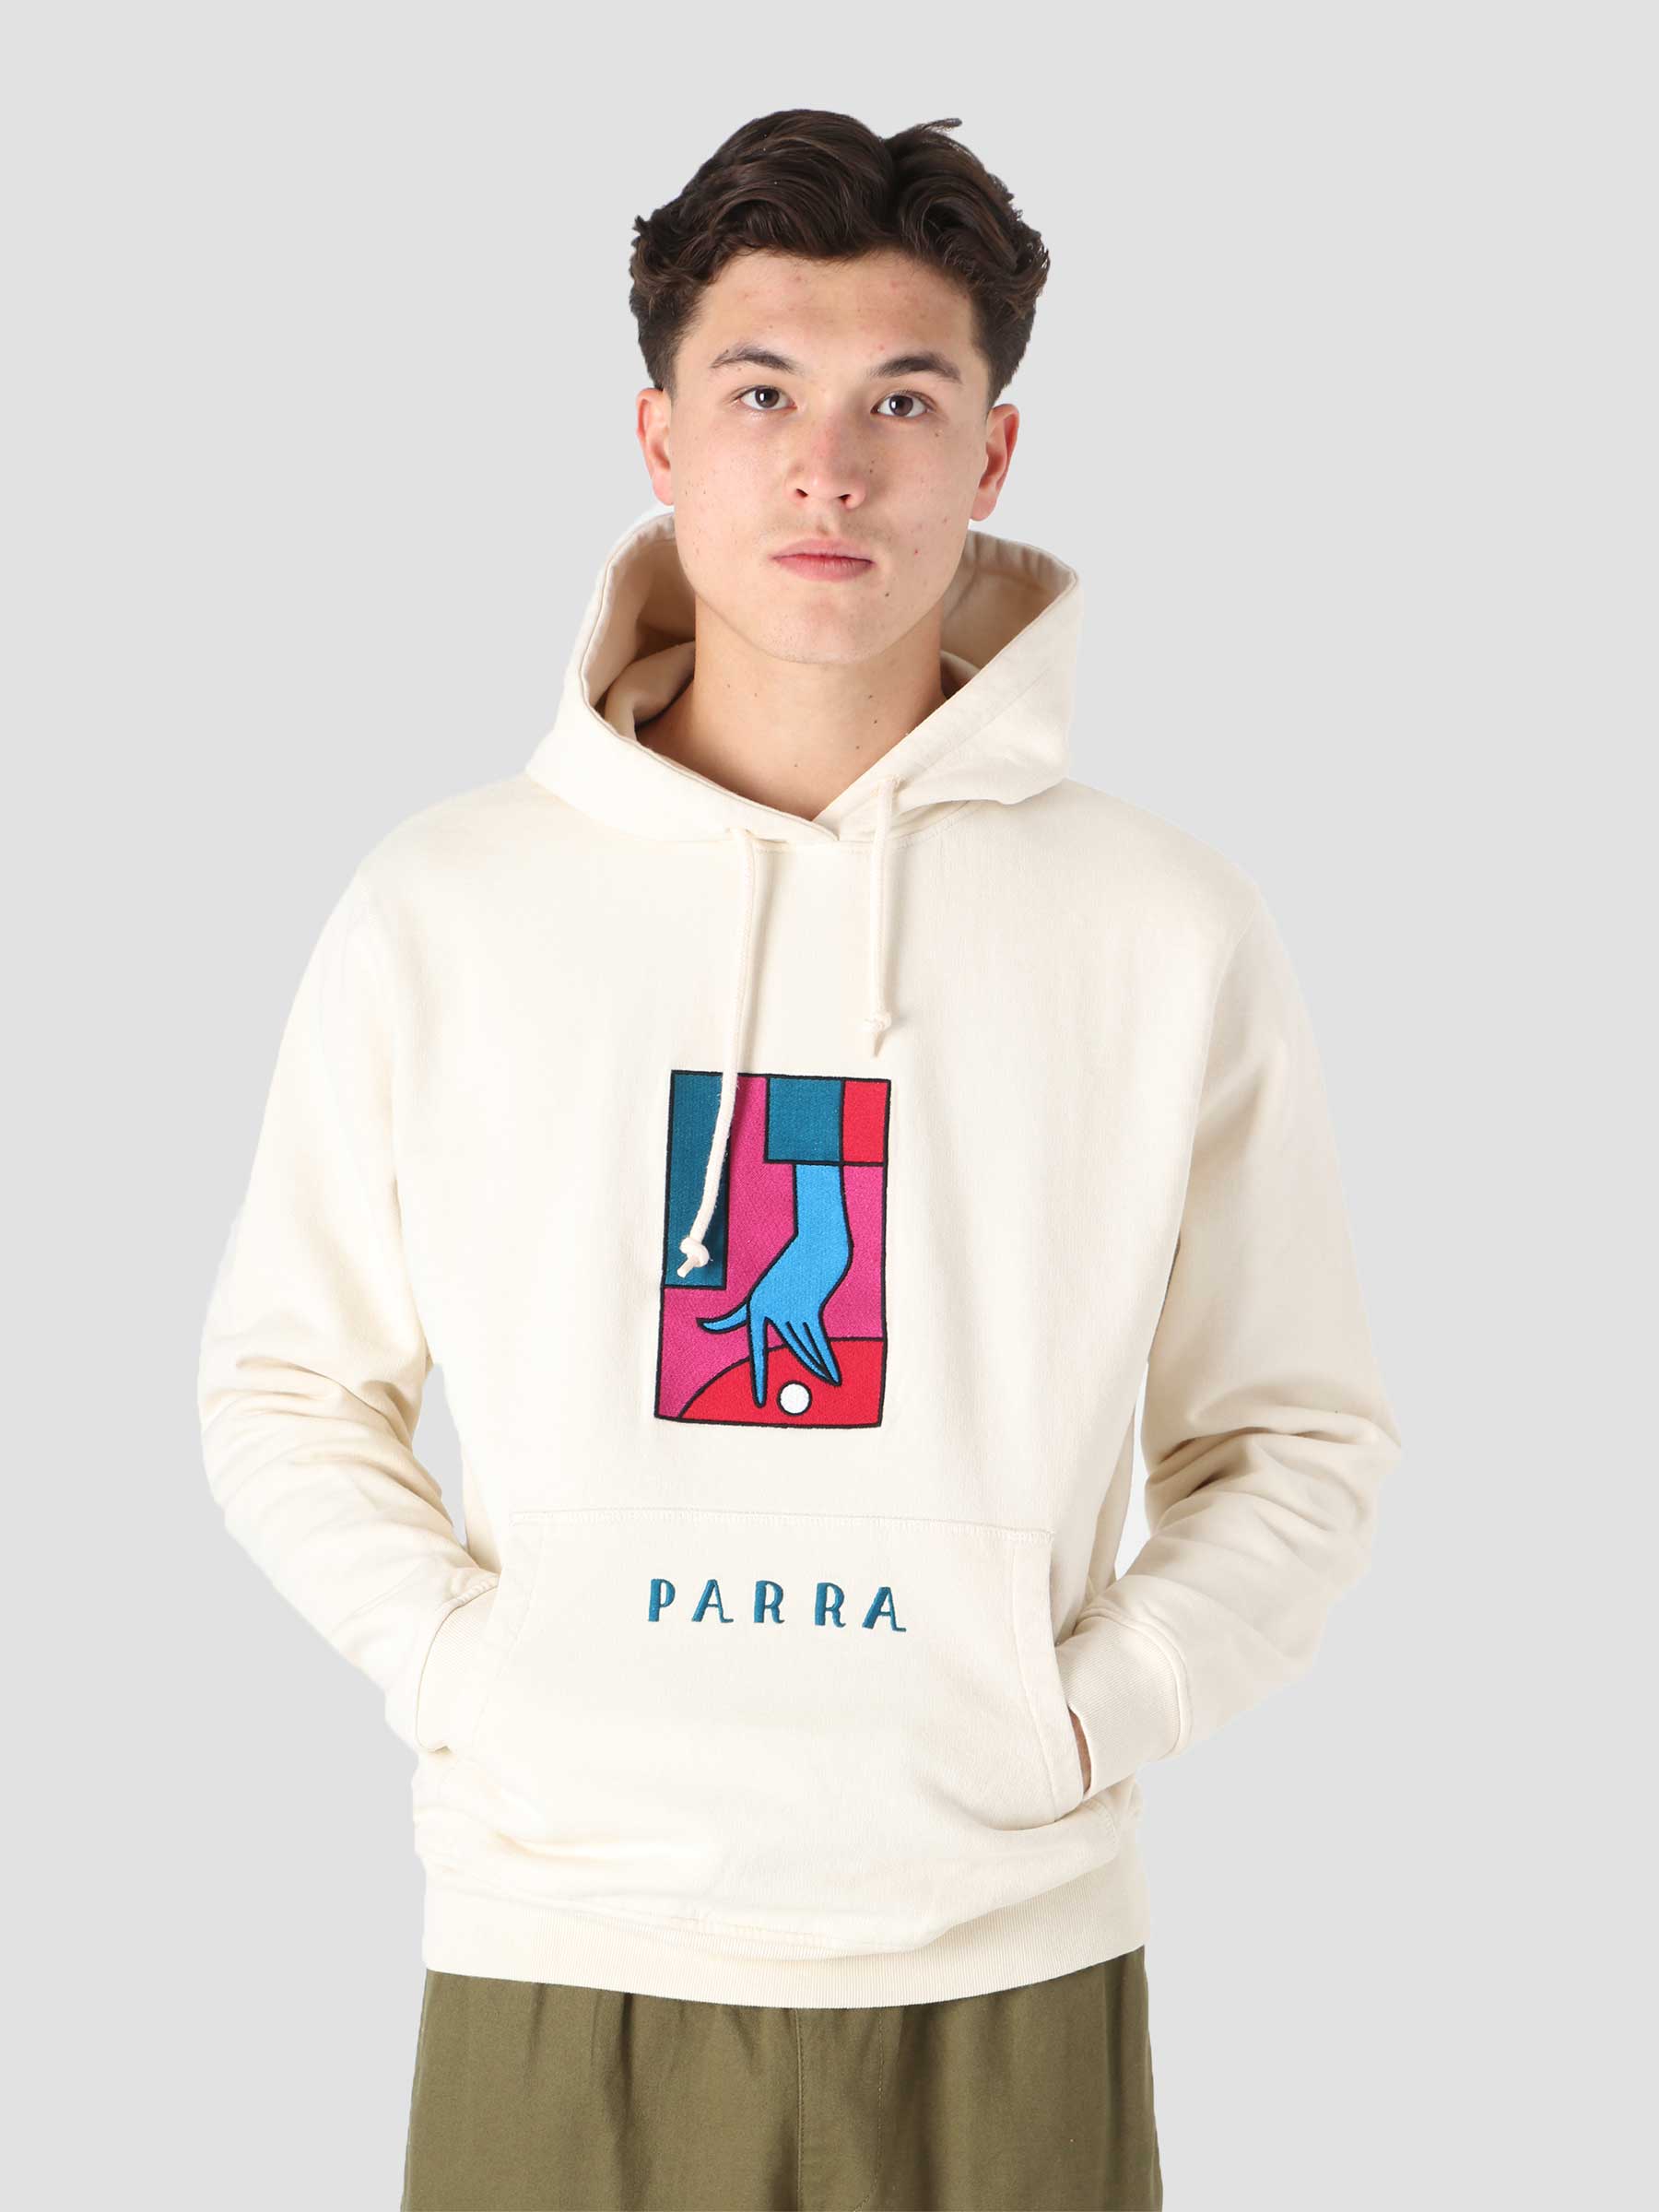 Vader taxi gebouw by Parra Medicated Hooded Sweatshirt Off White 46515 | Freshcotton